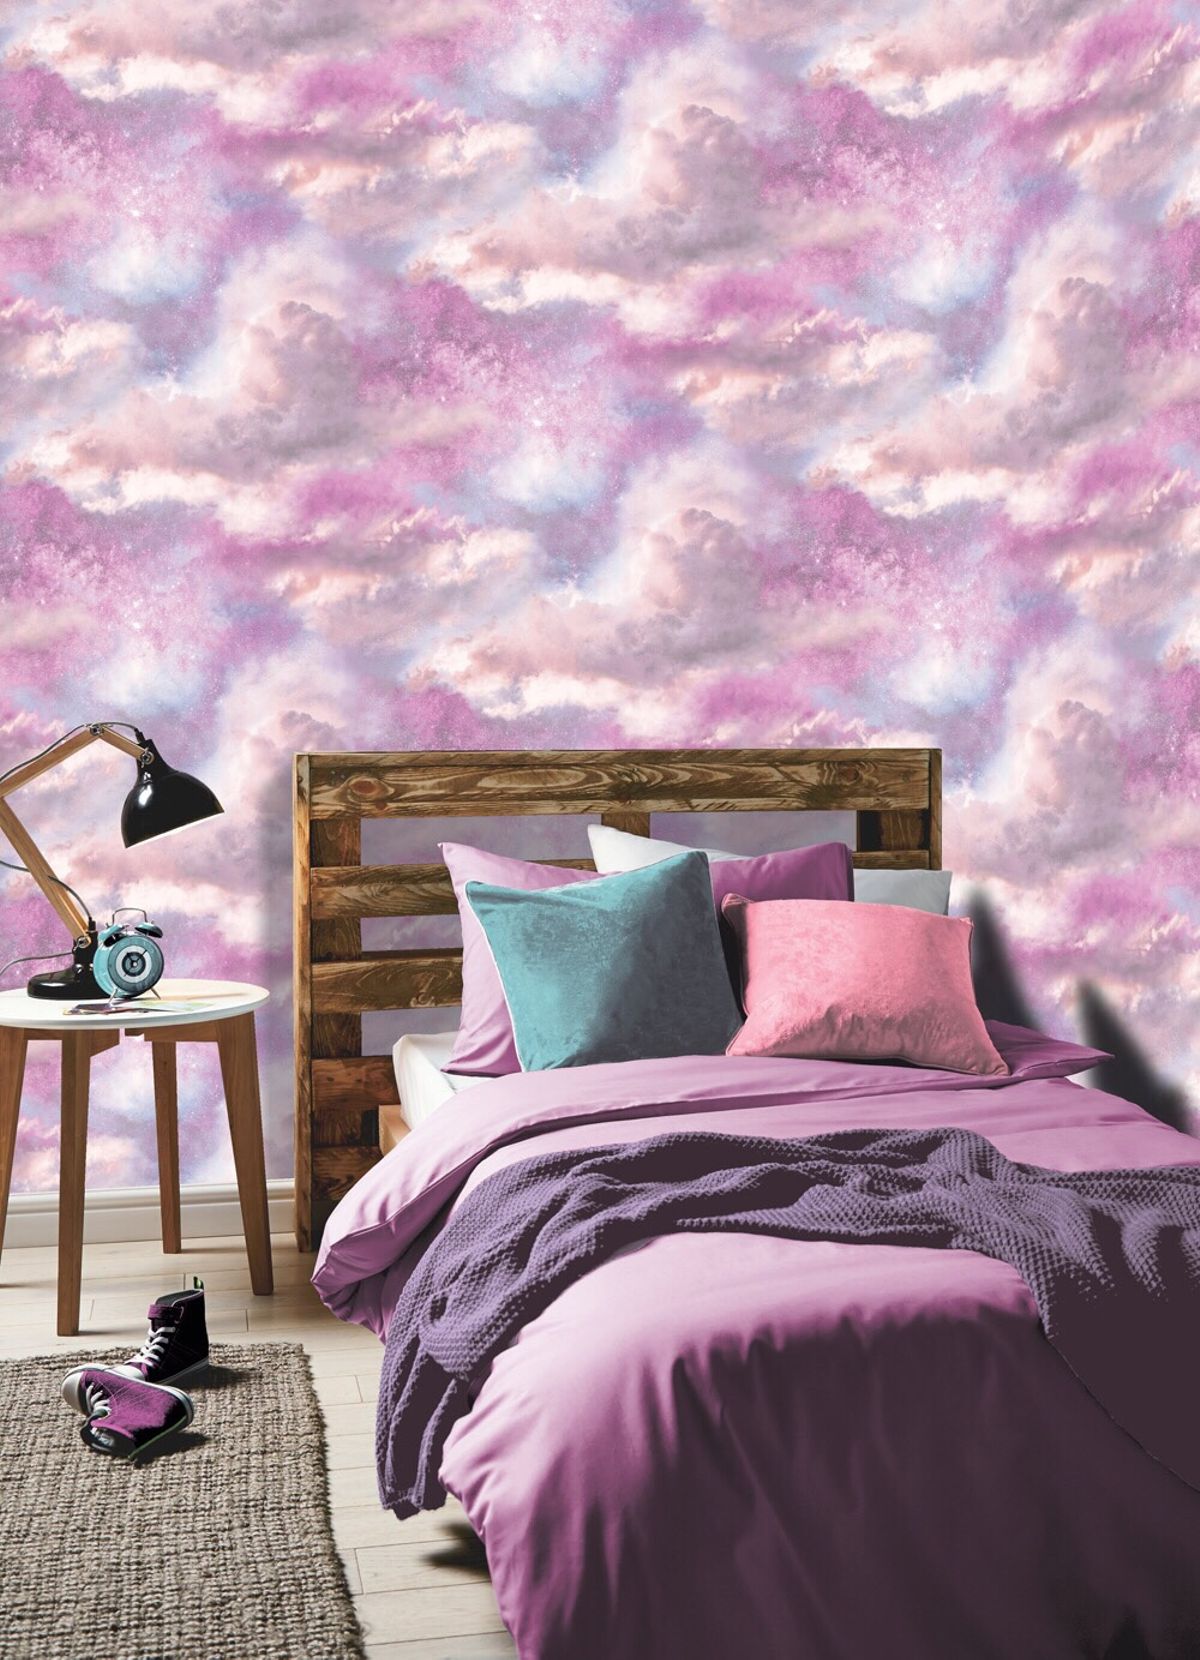 Another Brand New Absolutely Amazing Cloud ☁️ Design - Mermaid Glitter Wallpaper Bedroom - HD Wallpaper 